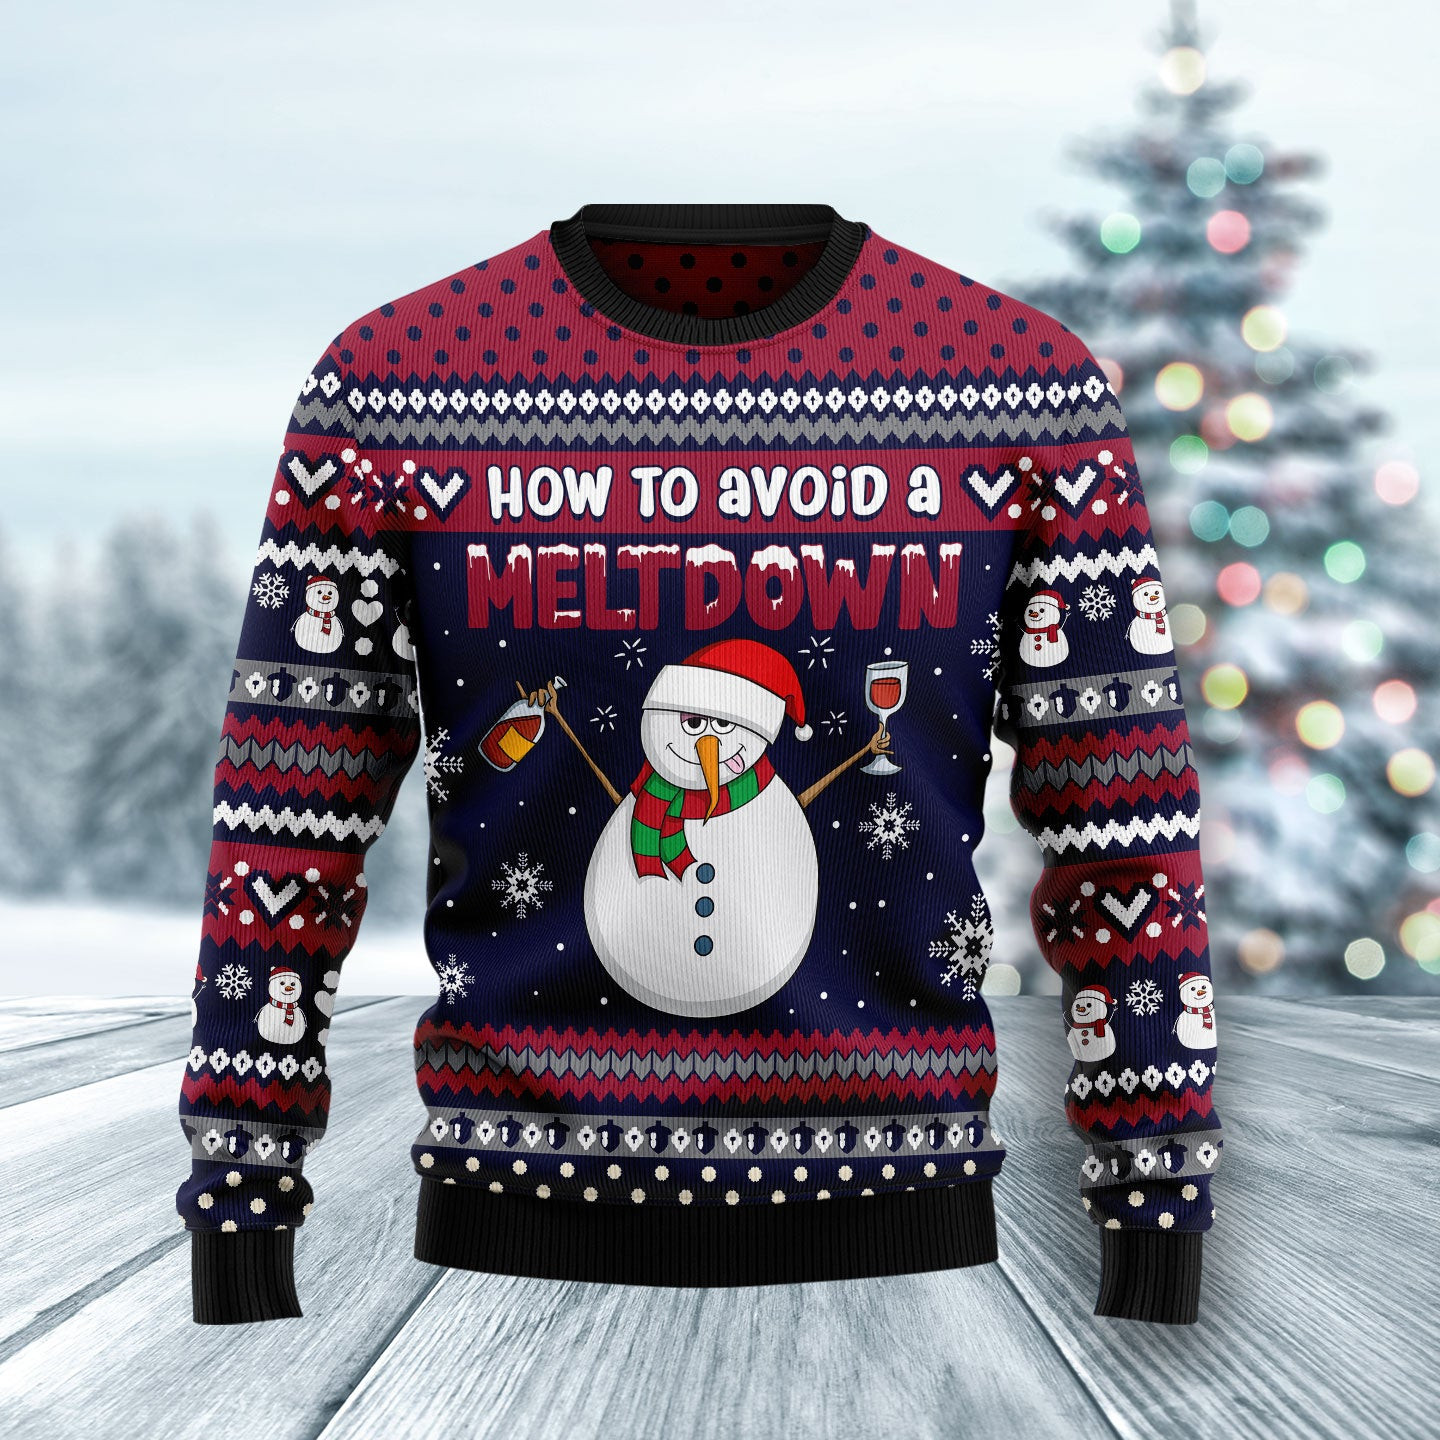 Red Wine Snowman How To Avoid A Meltdown Ugly Christmas Sweater, Ugly Sweater For Men Women, Holiday Sweater